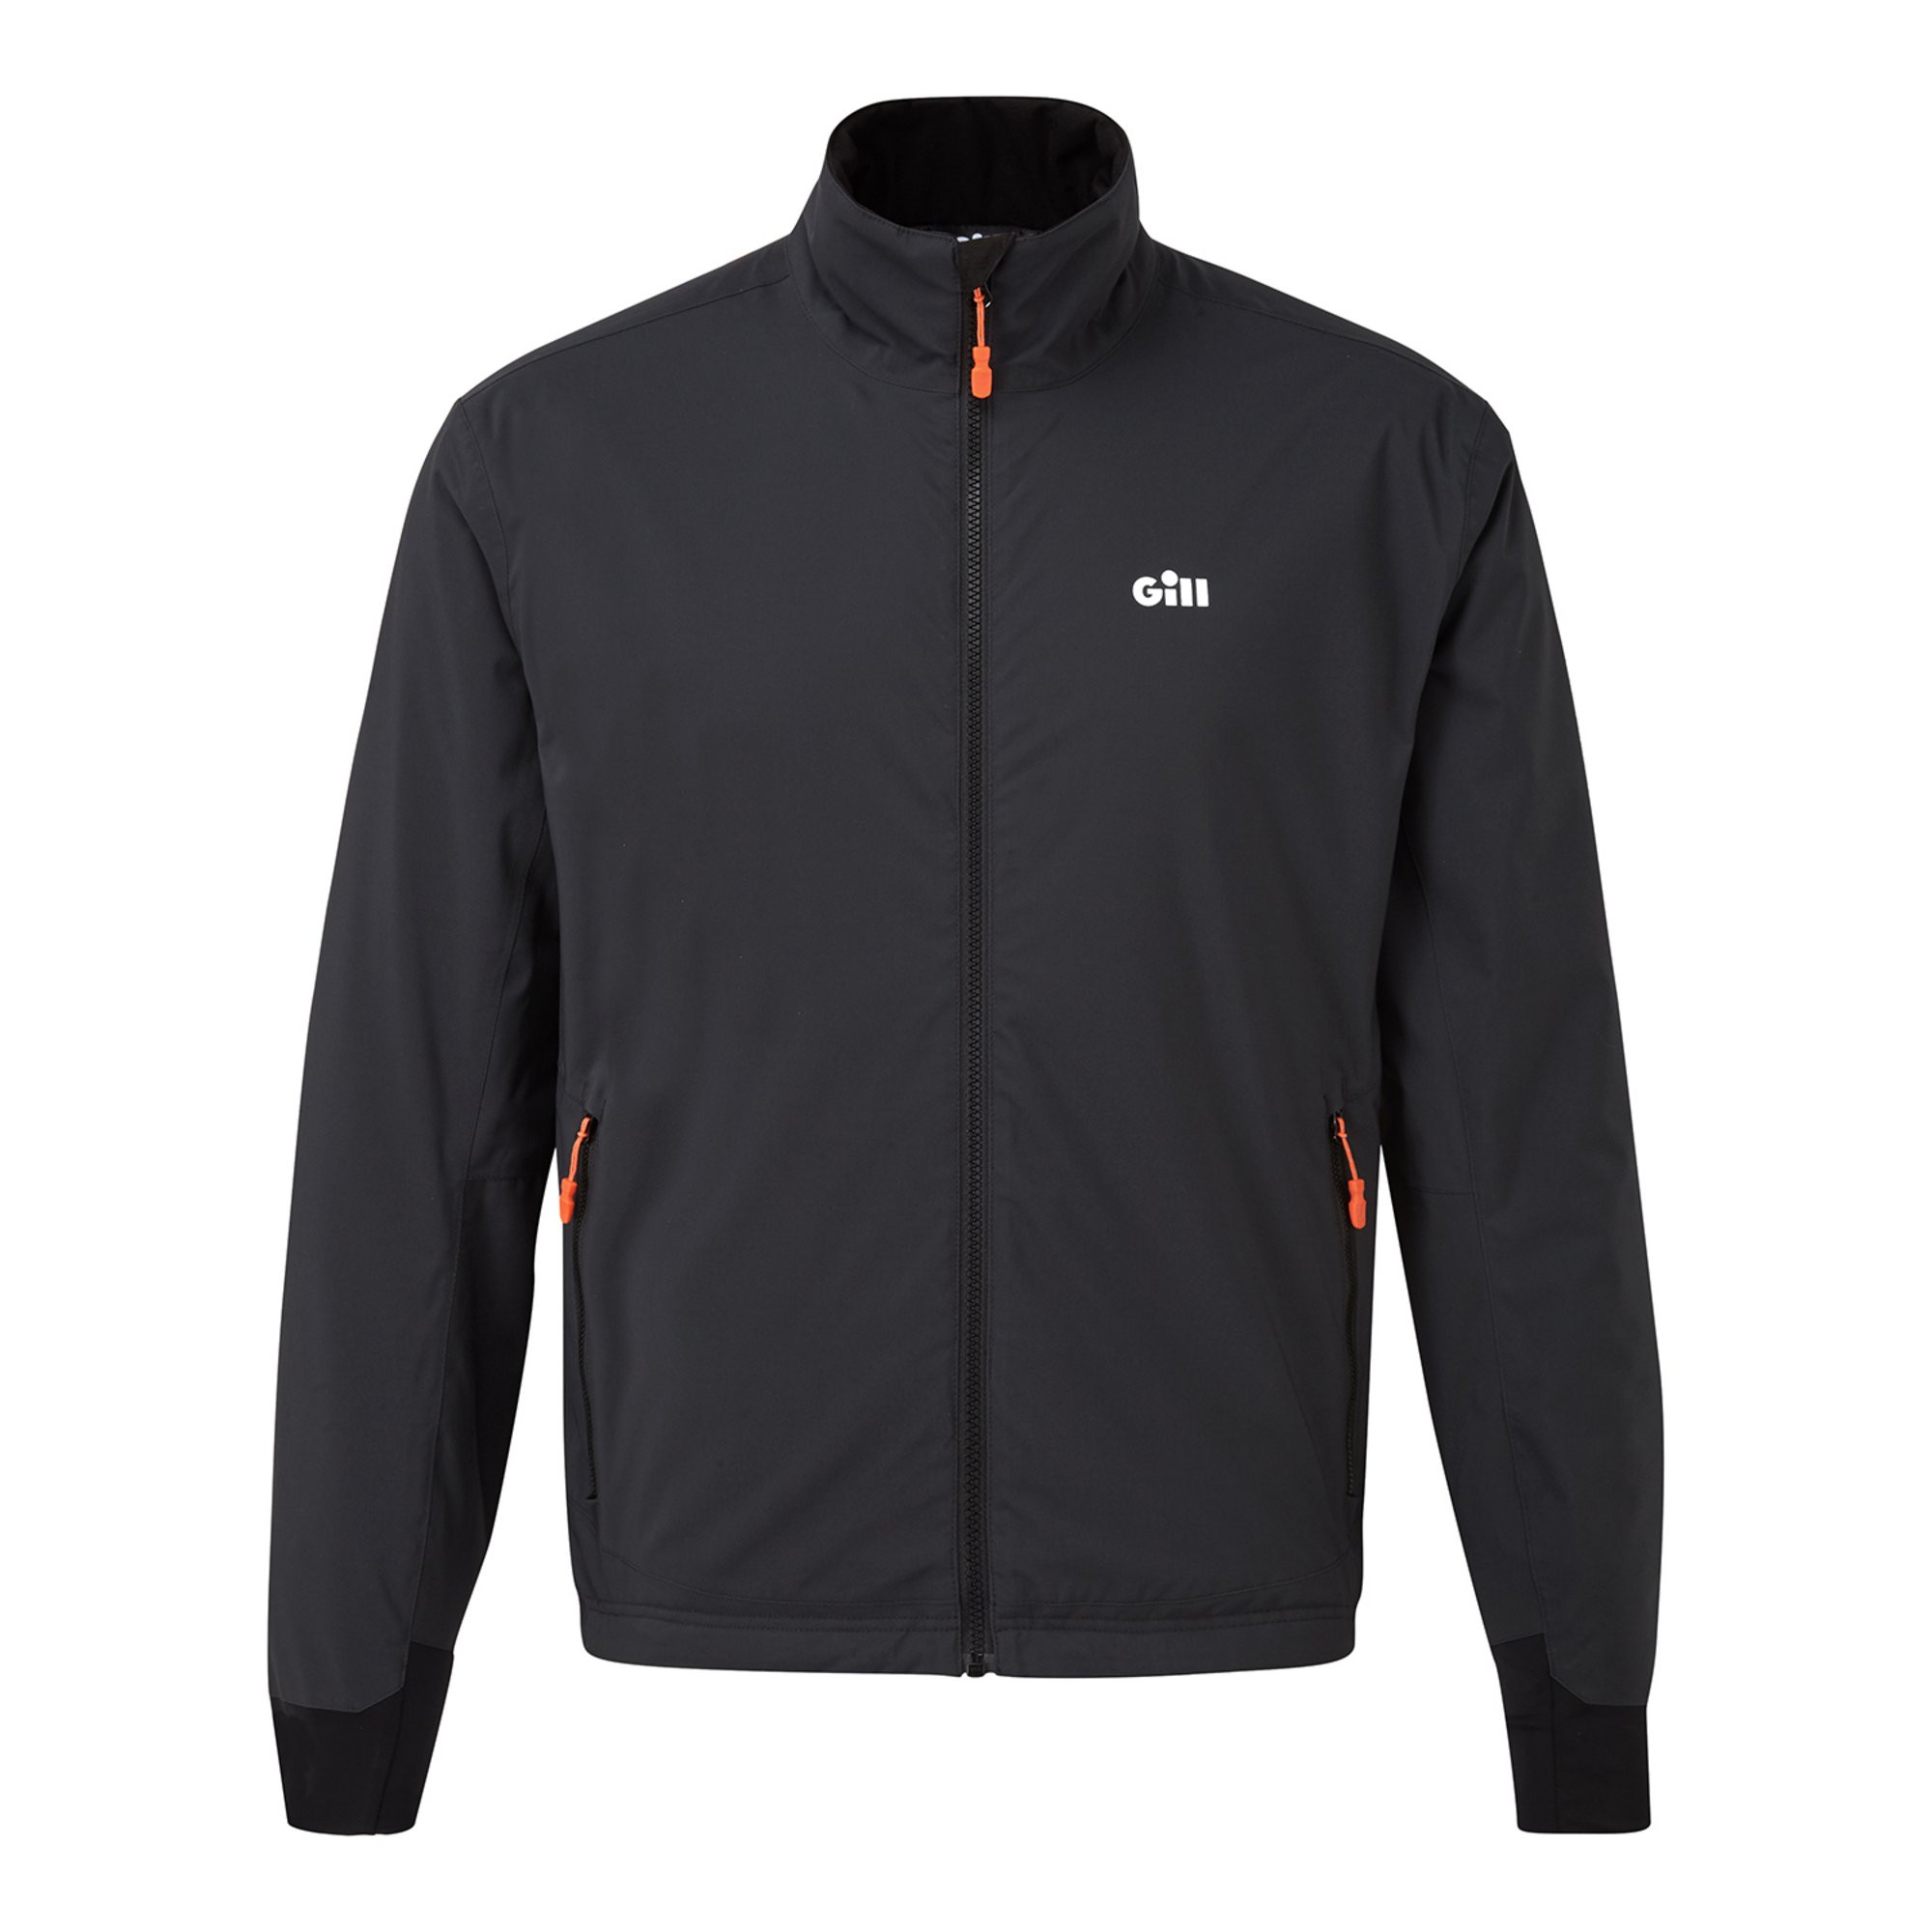 OS INSULATED JACKET GRAPHITE,XL